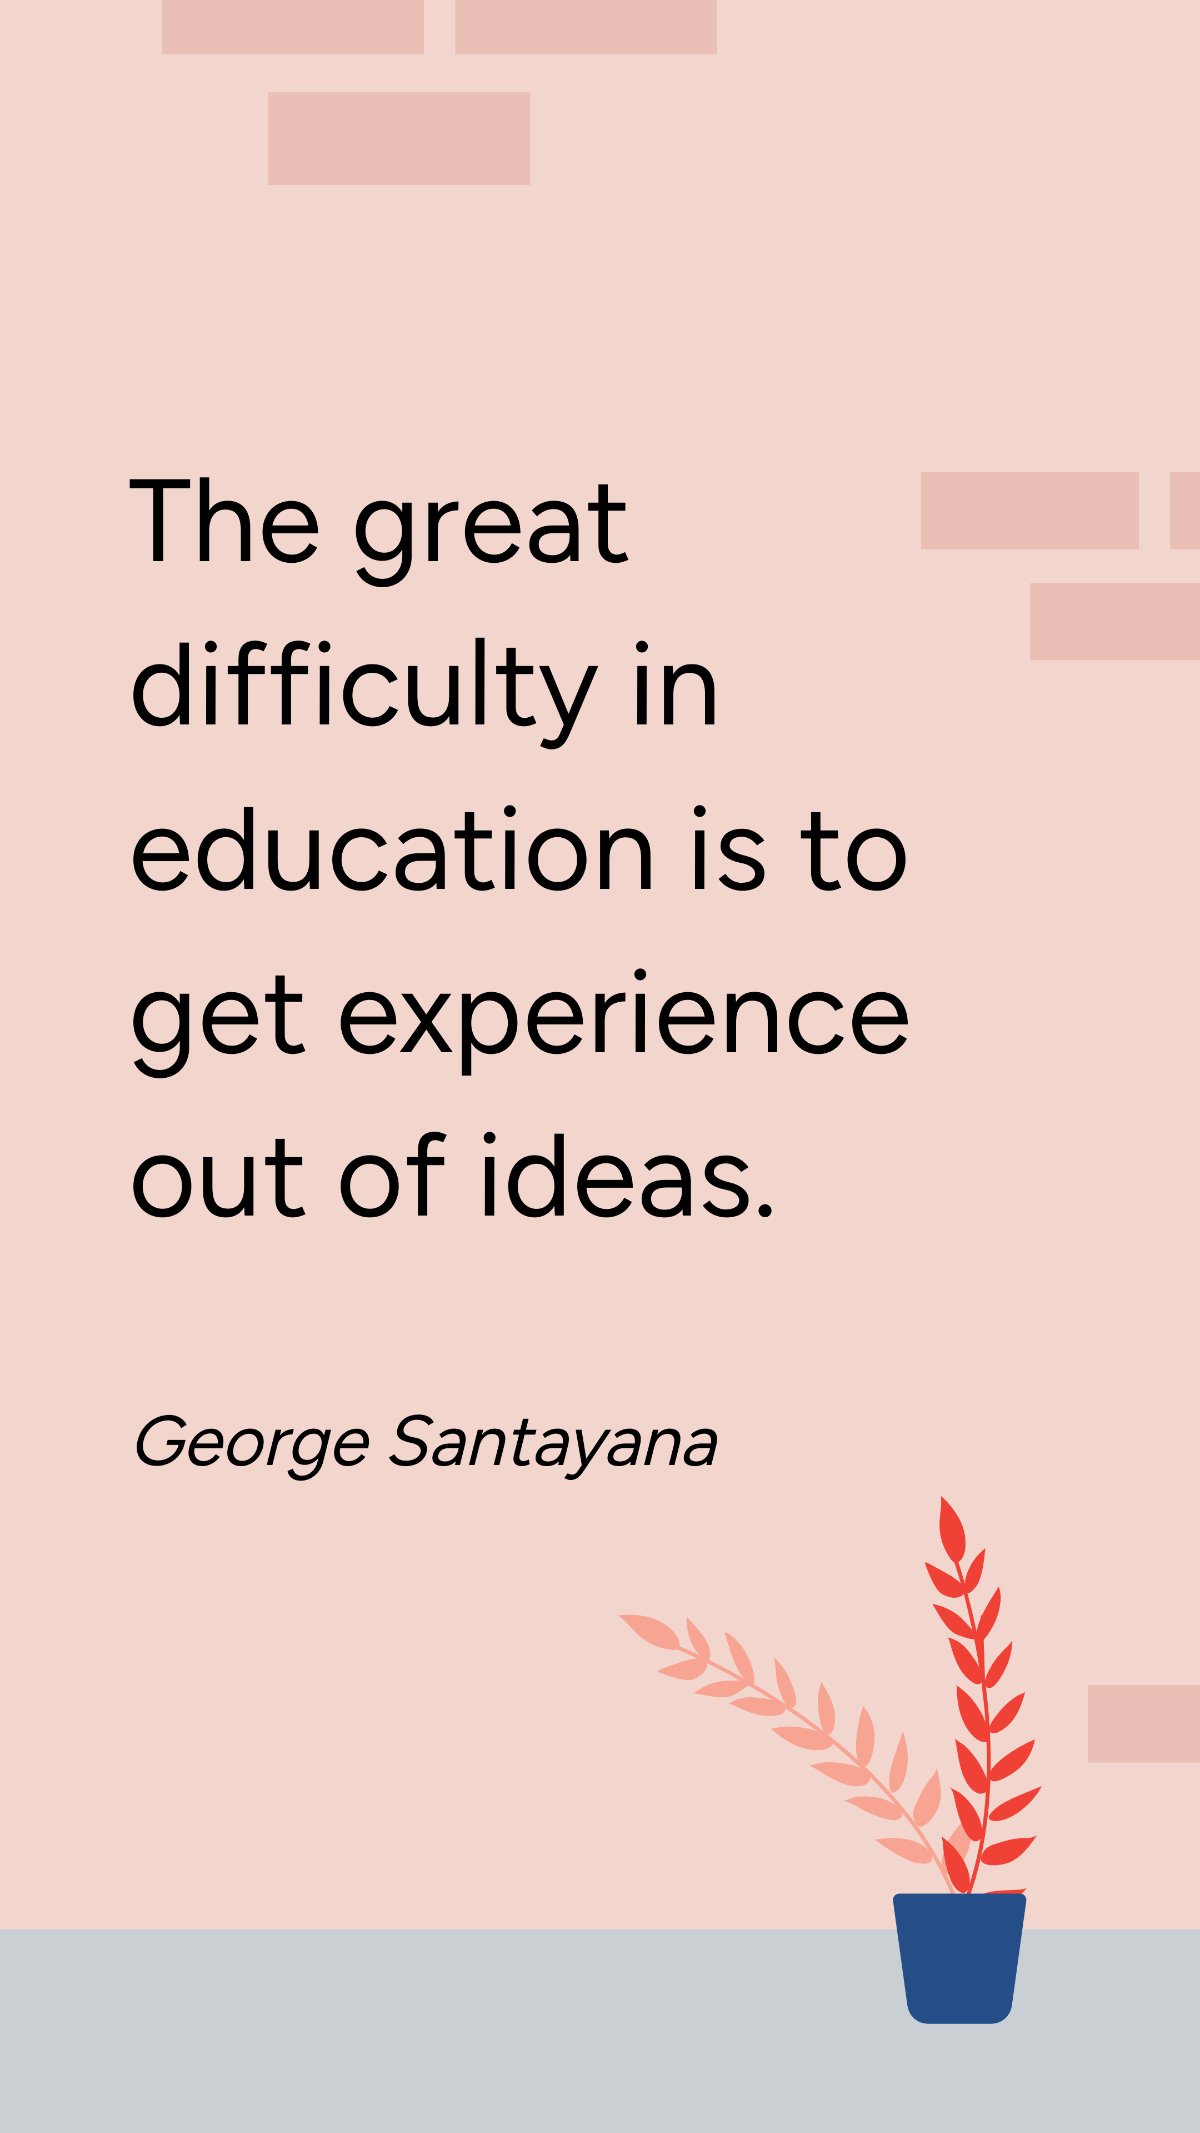 George Santayana - The great difficulty in education is to get experience out of ideas.